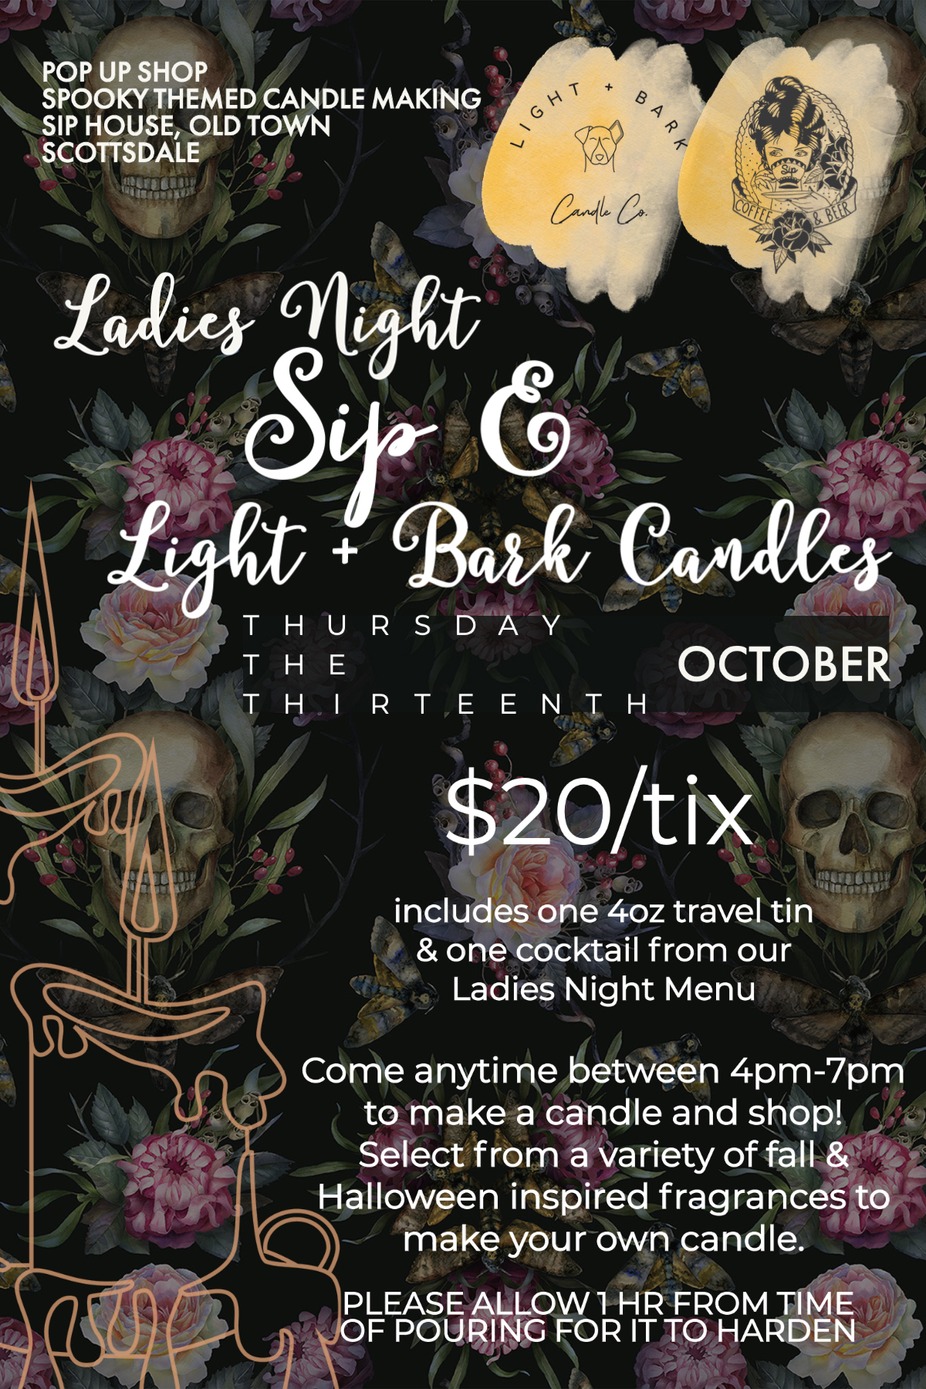 Ladies Night with Light + Bark Candles event photo